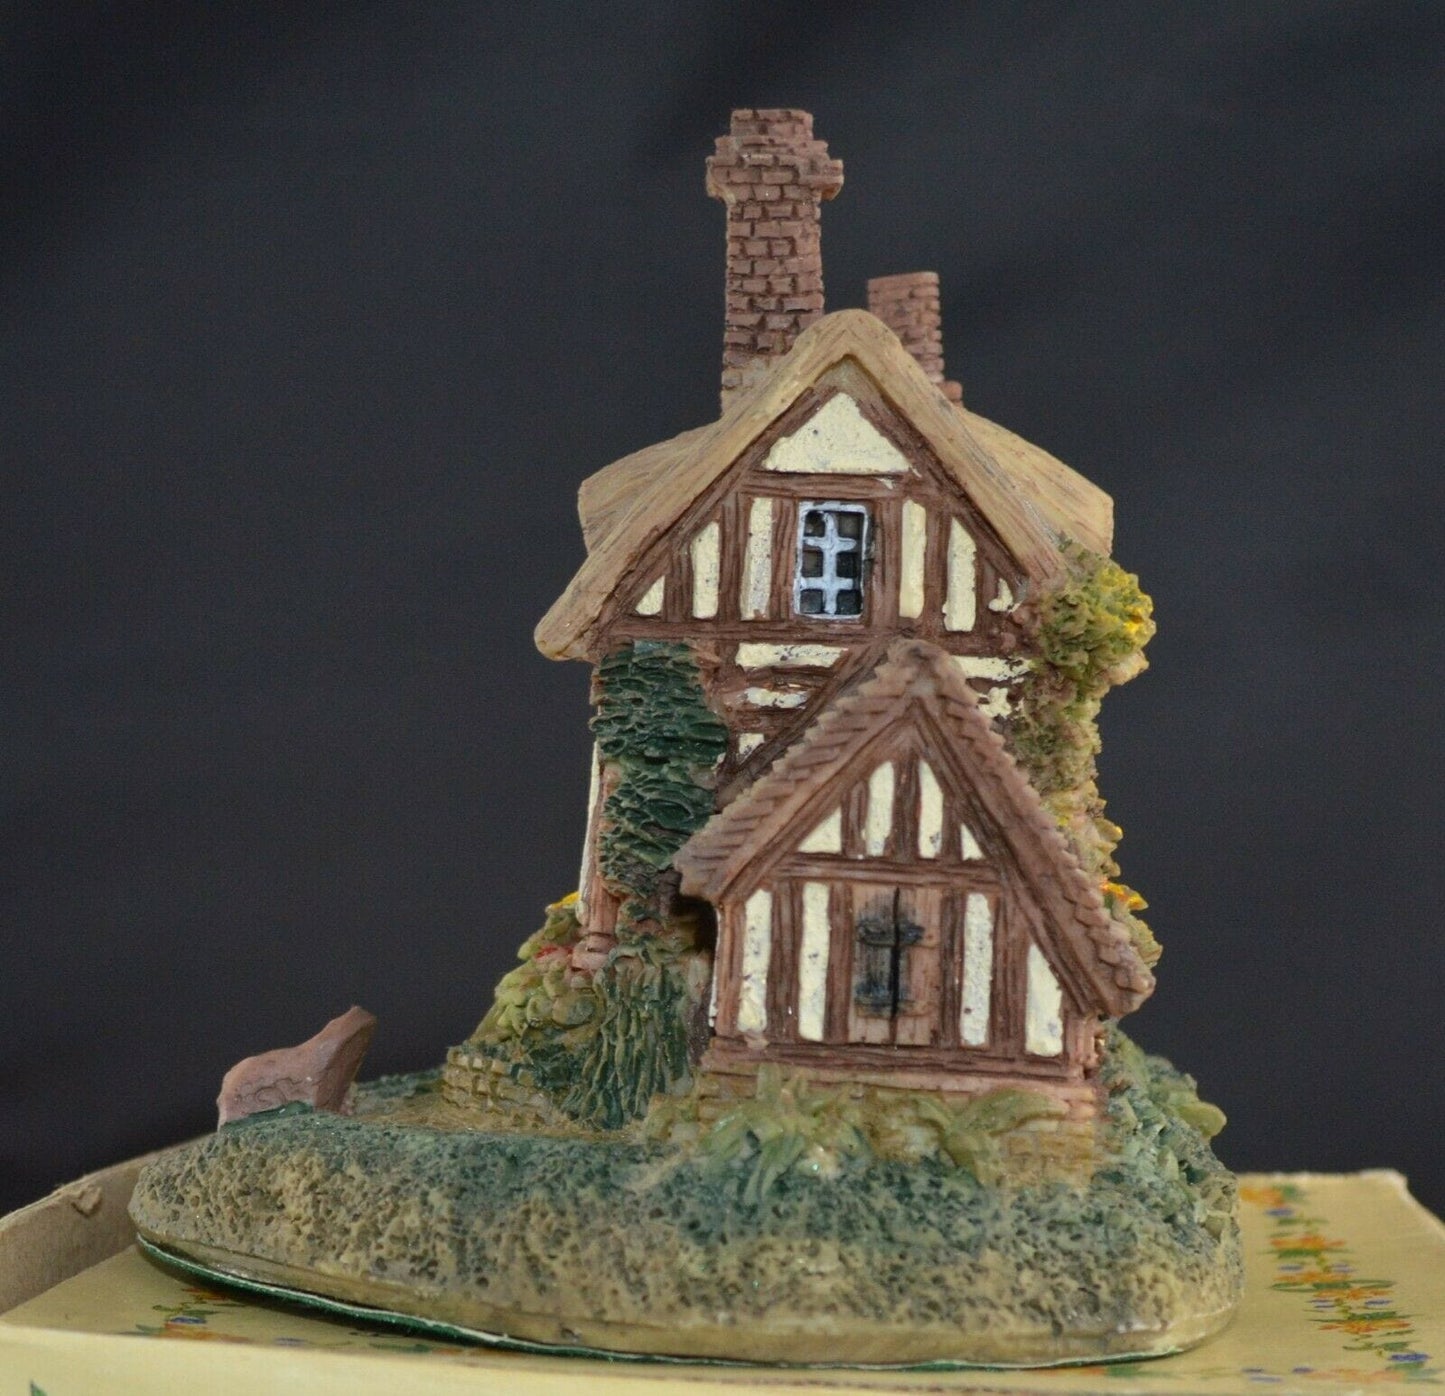 SIX LITTLE MEADOW SERIES ORNAMENTAL COTTAGES by SALCO(PREVIOUSLY OWNED) GOOD CONDITION - TMD167207